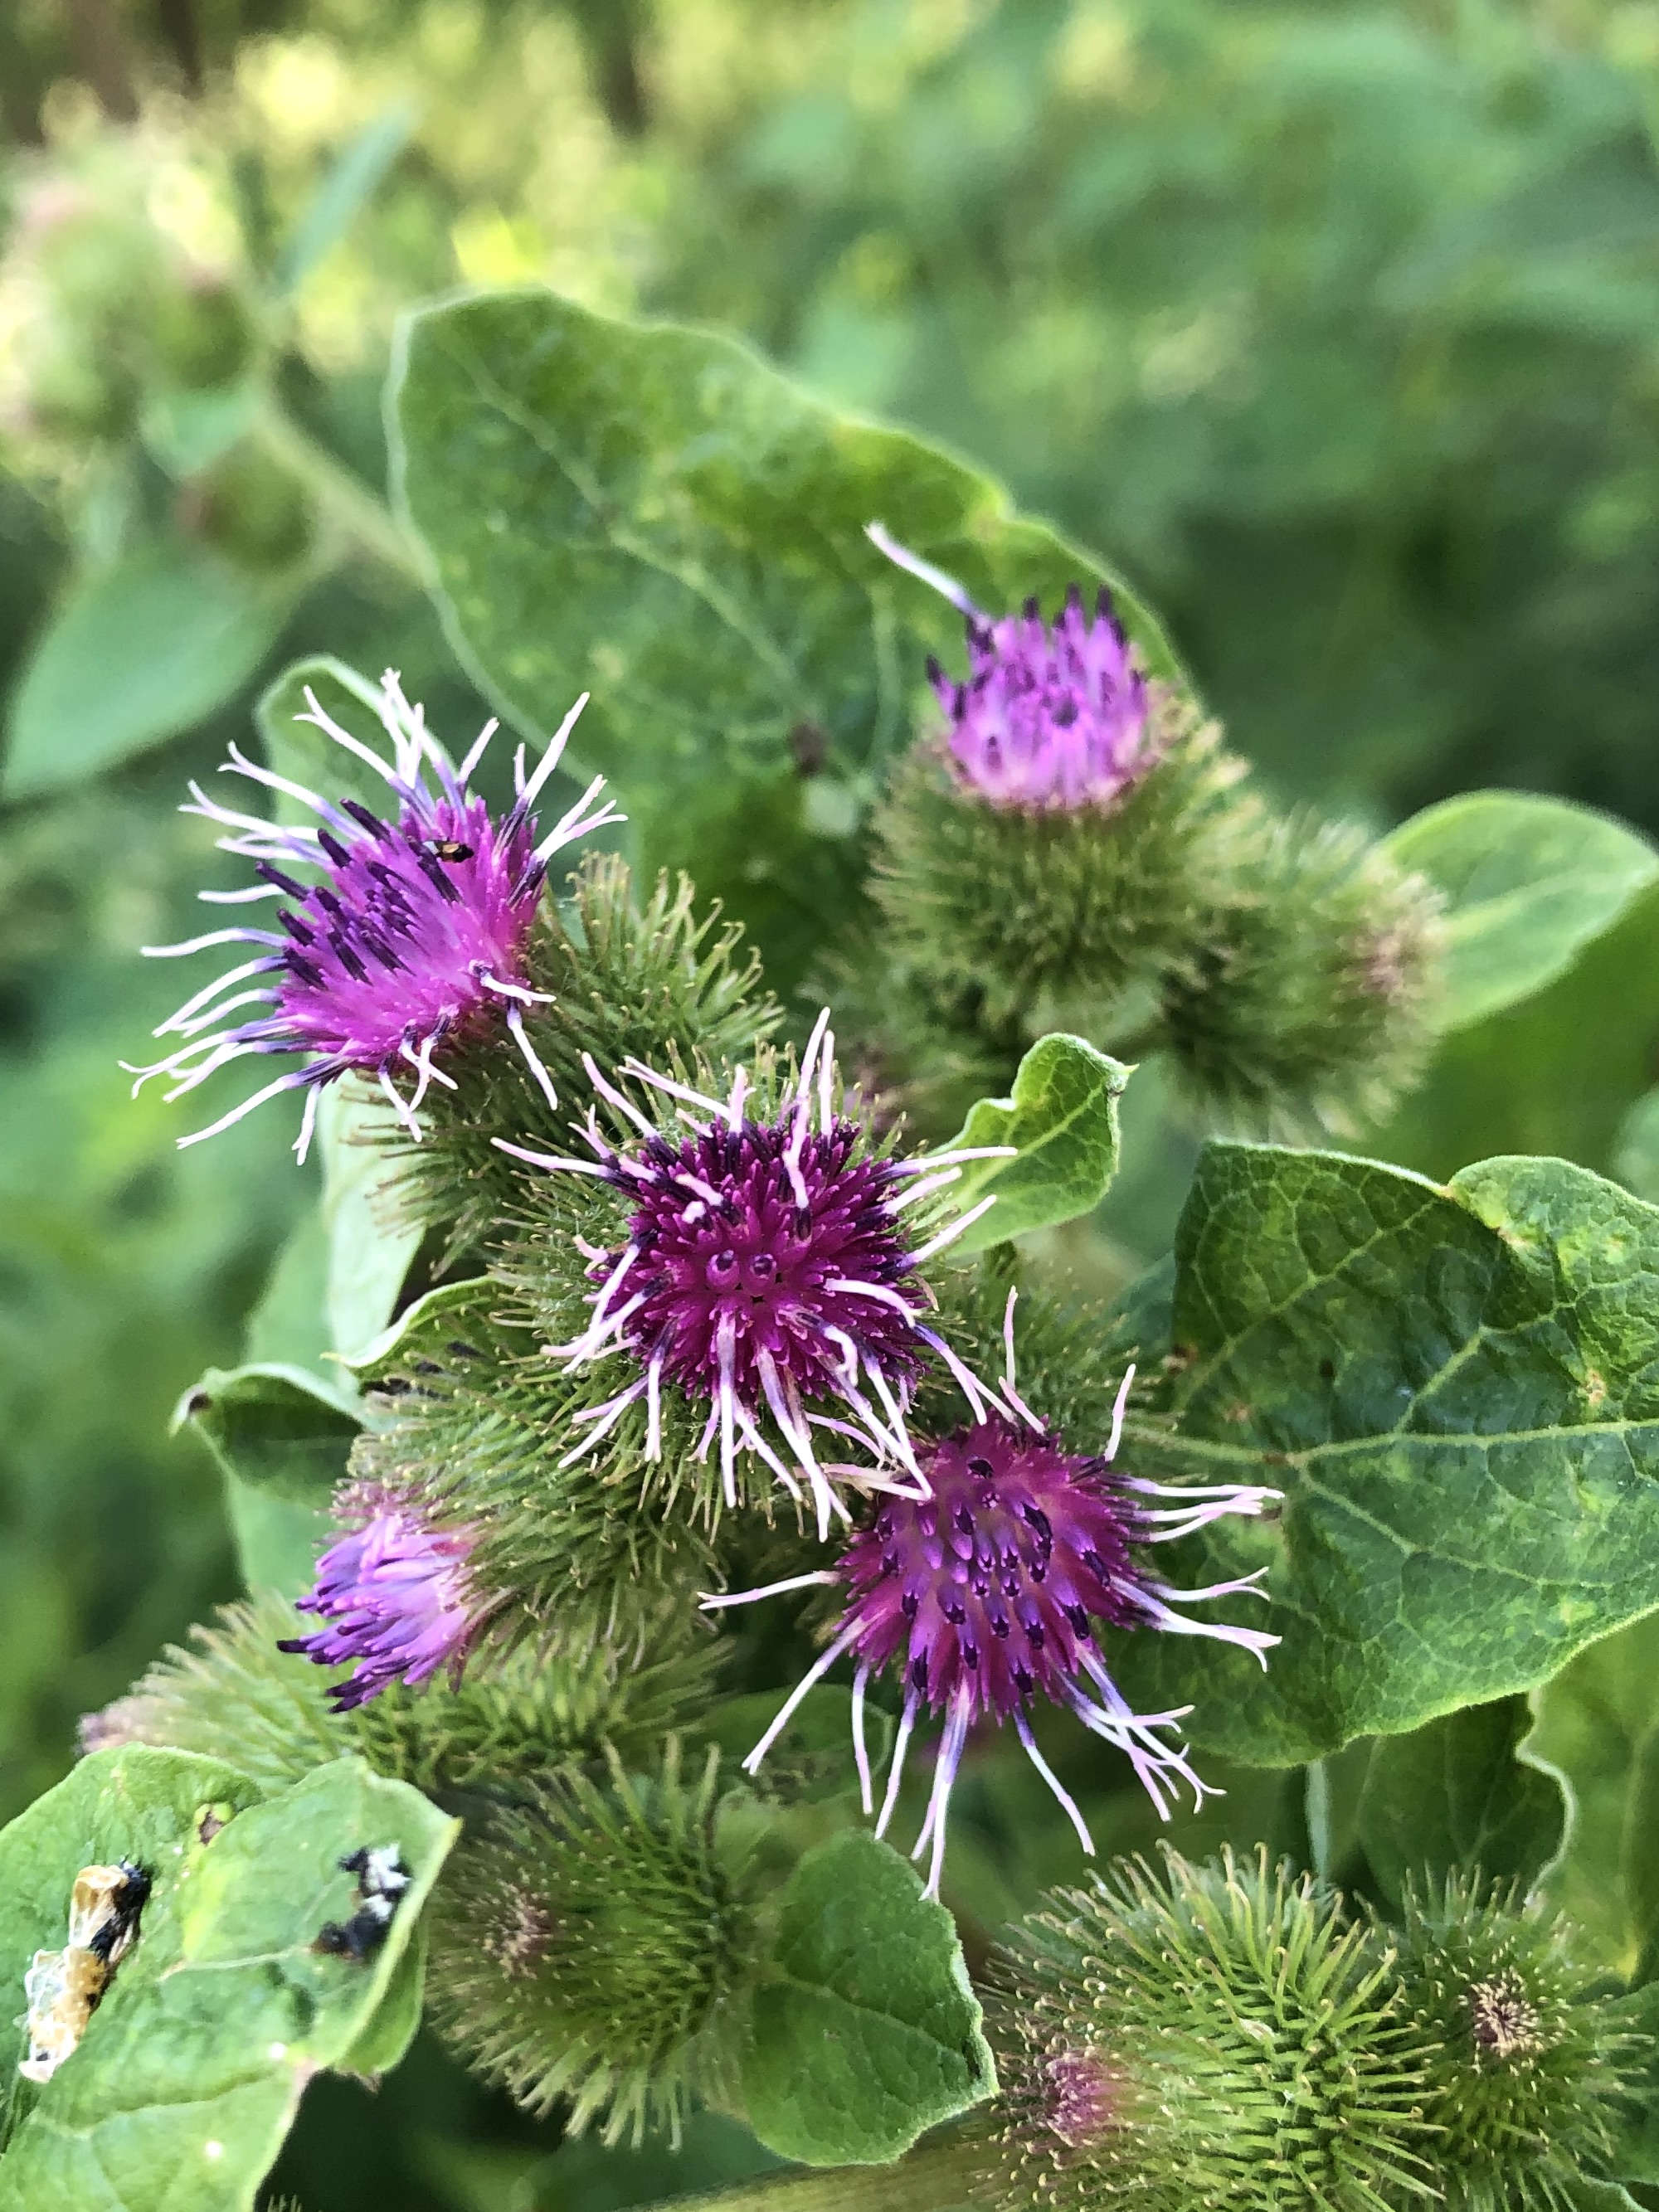 Burdock at edge of woods near  Marion Dunn Pond on July 23, 2022.